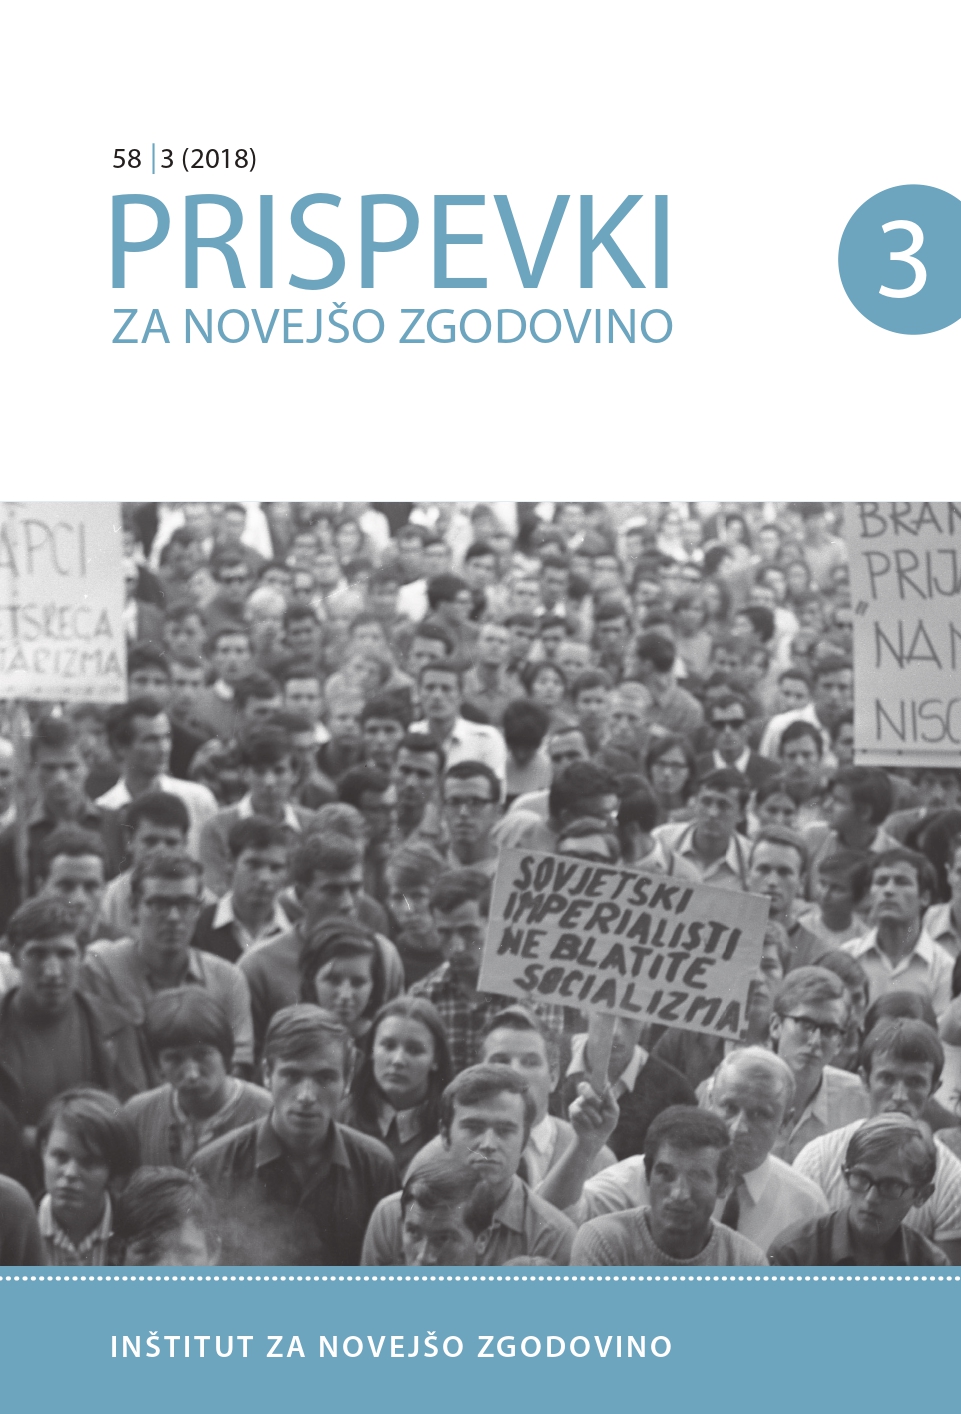 The Student Movement 1968/1971 in Ljubljana in Wider Context